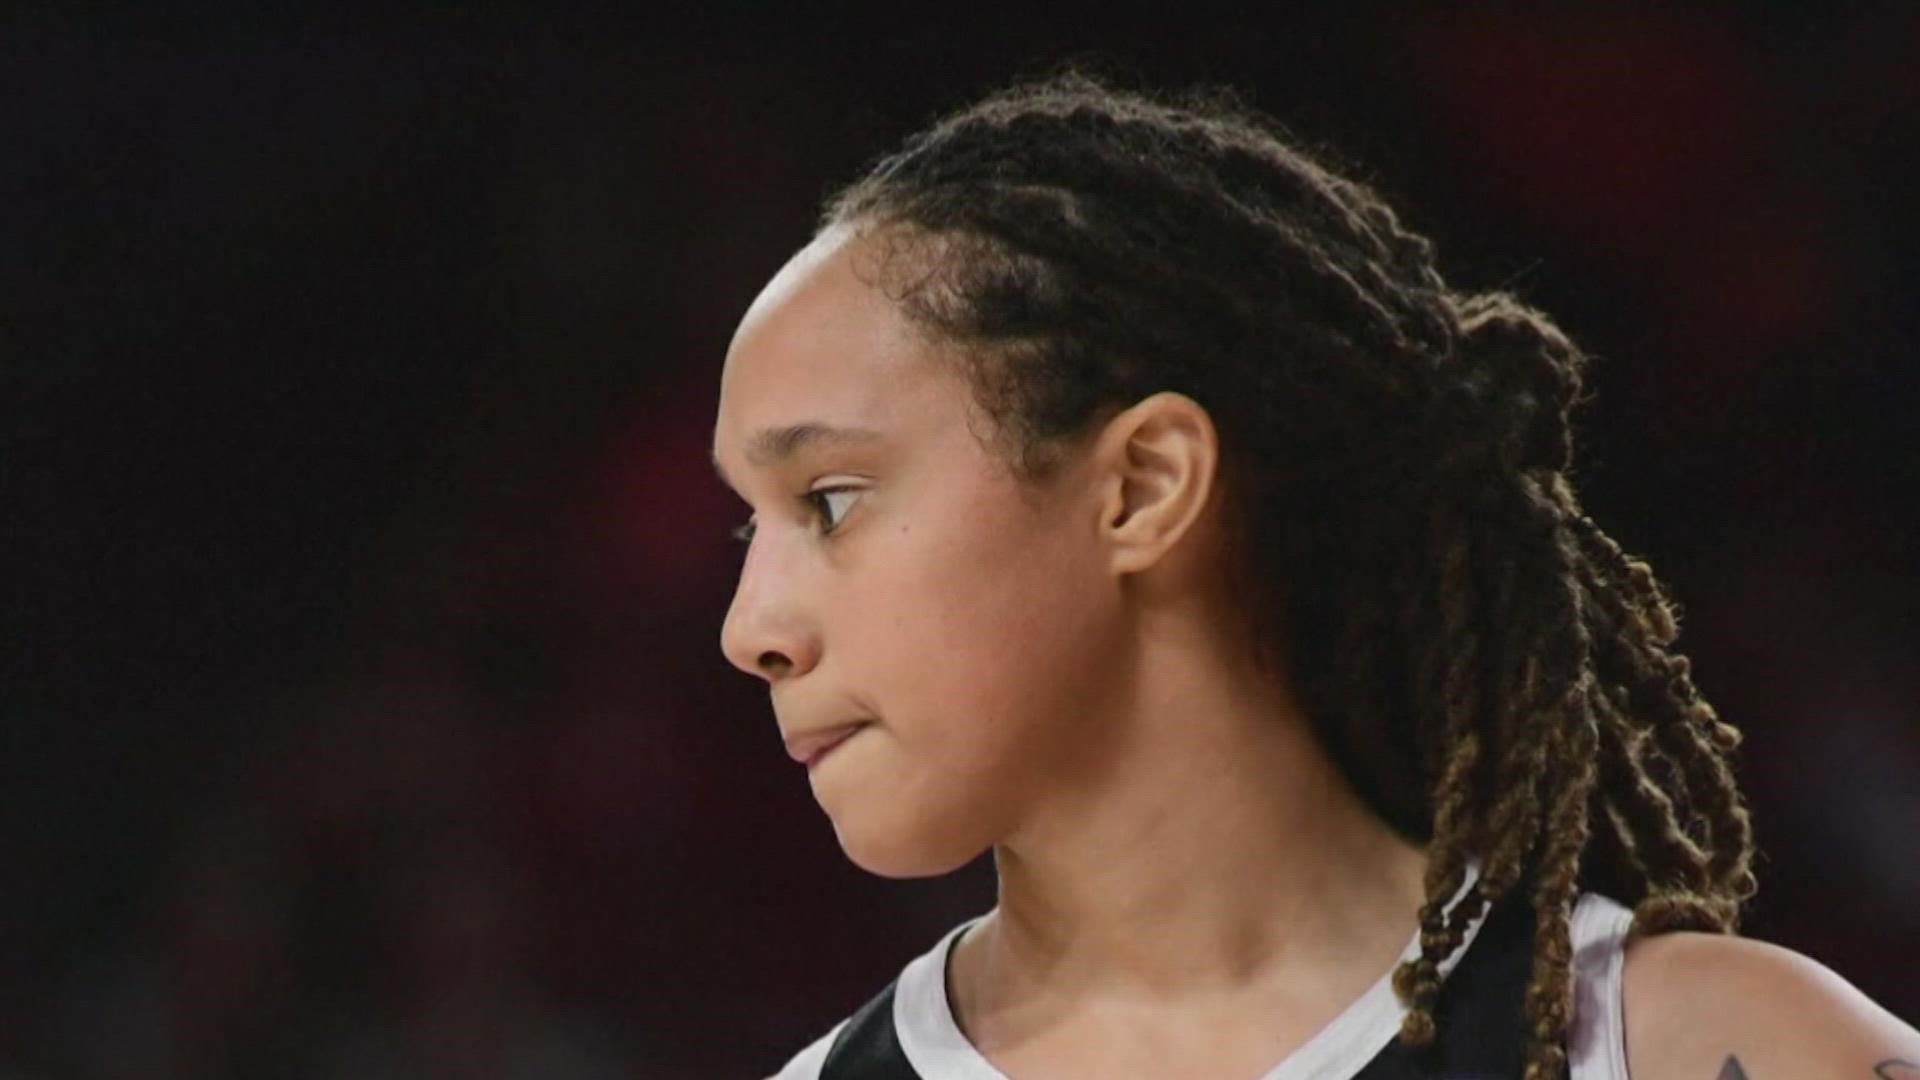 A Moscow court has extended the arrest of WNBA star and Houston native Brittney Griner until May 19, according to the Russian state news agency Tass.